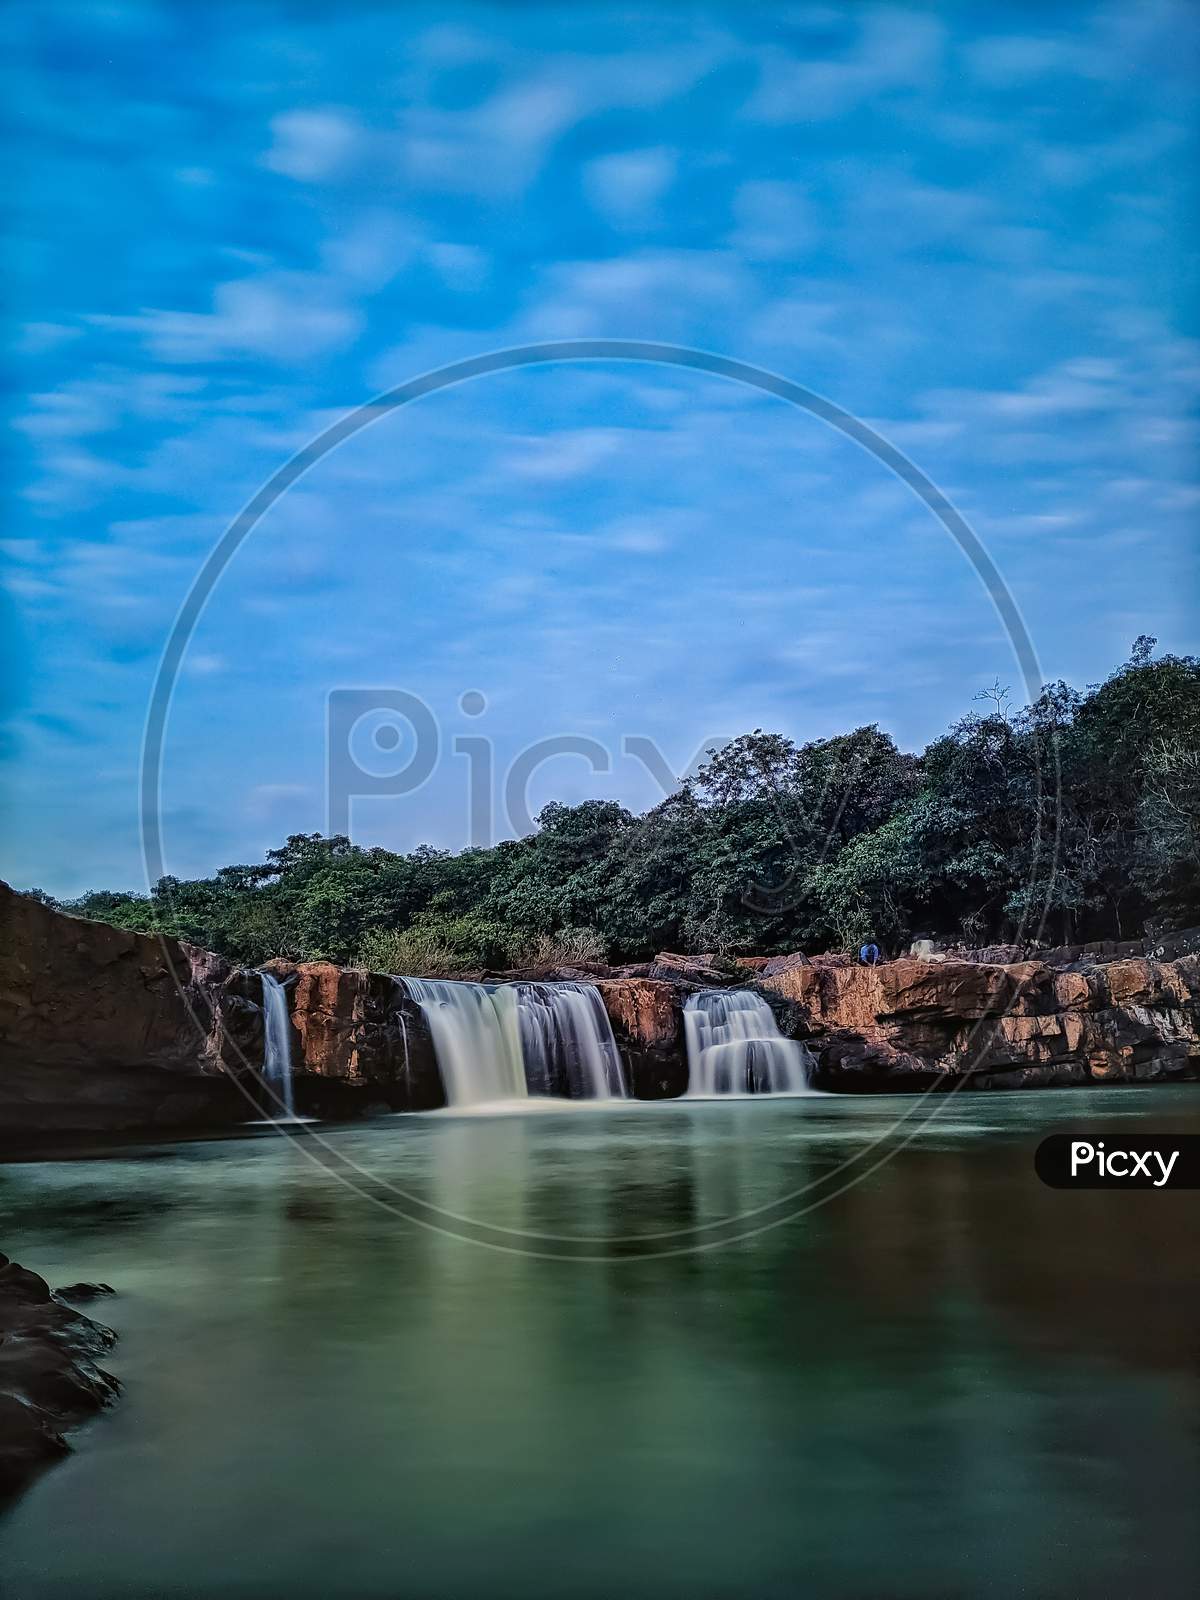 small beautiful waterfall picture at evening, long exposure.